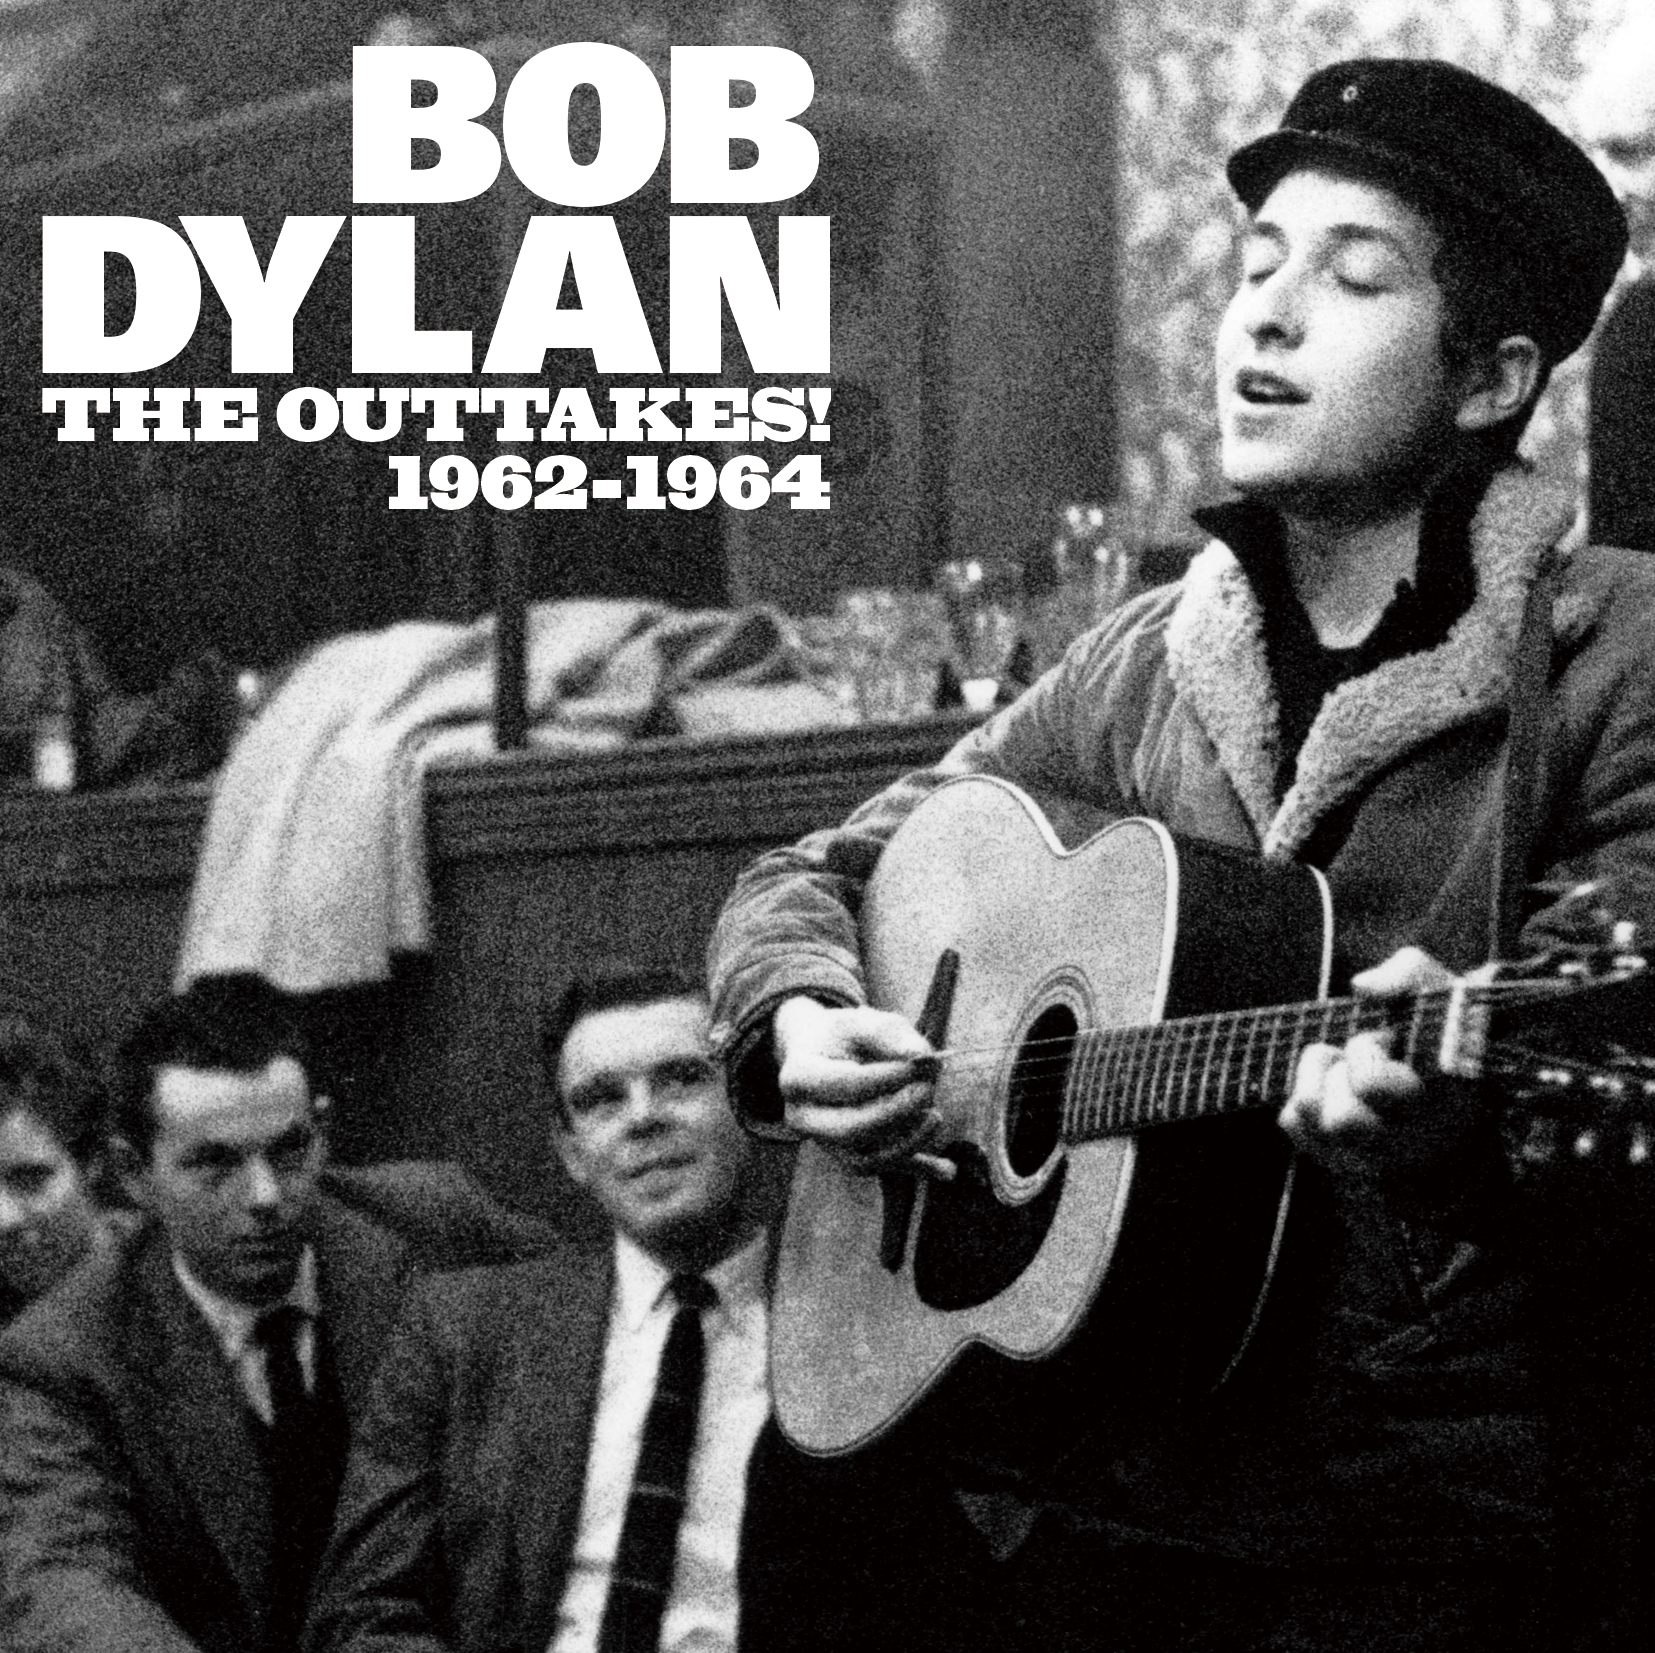 BOB DYLAN / THE OUTTAKES ! 1962-1964